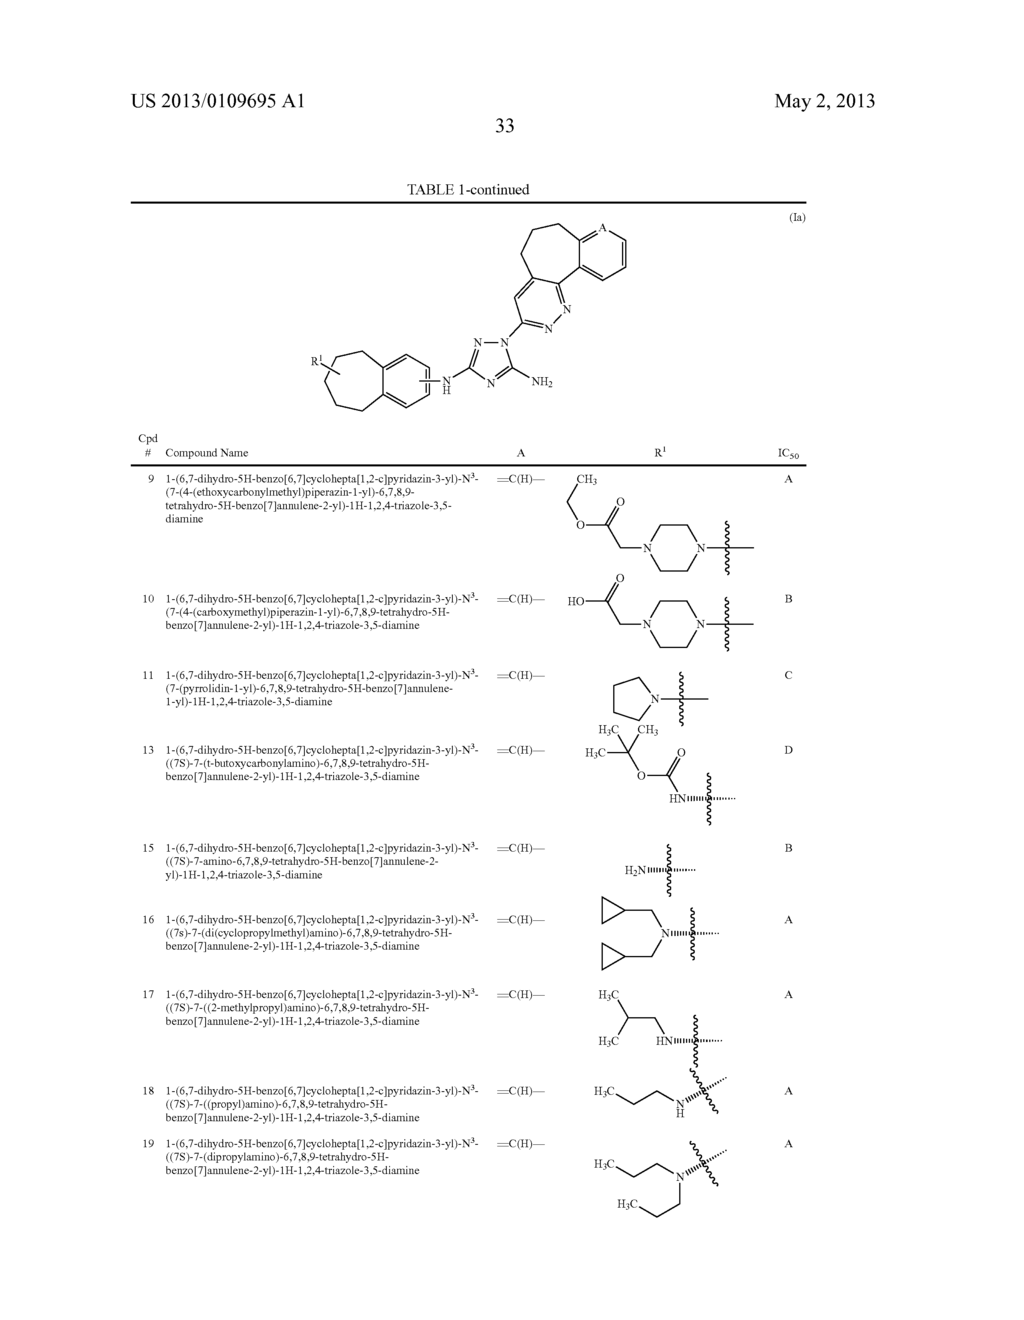 POLYCYCLIC HETEROARYL SUBSTITUTED TRIAZOLES USEFUL AS AXL INHIBITORS - diagram, schematic, and image 34